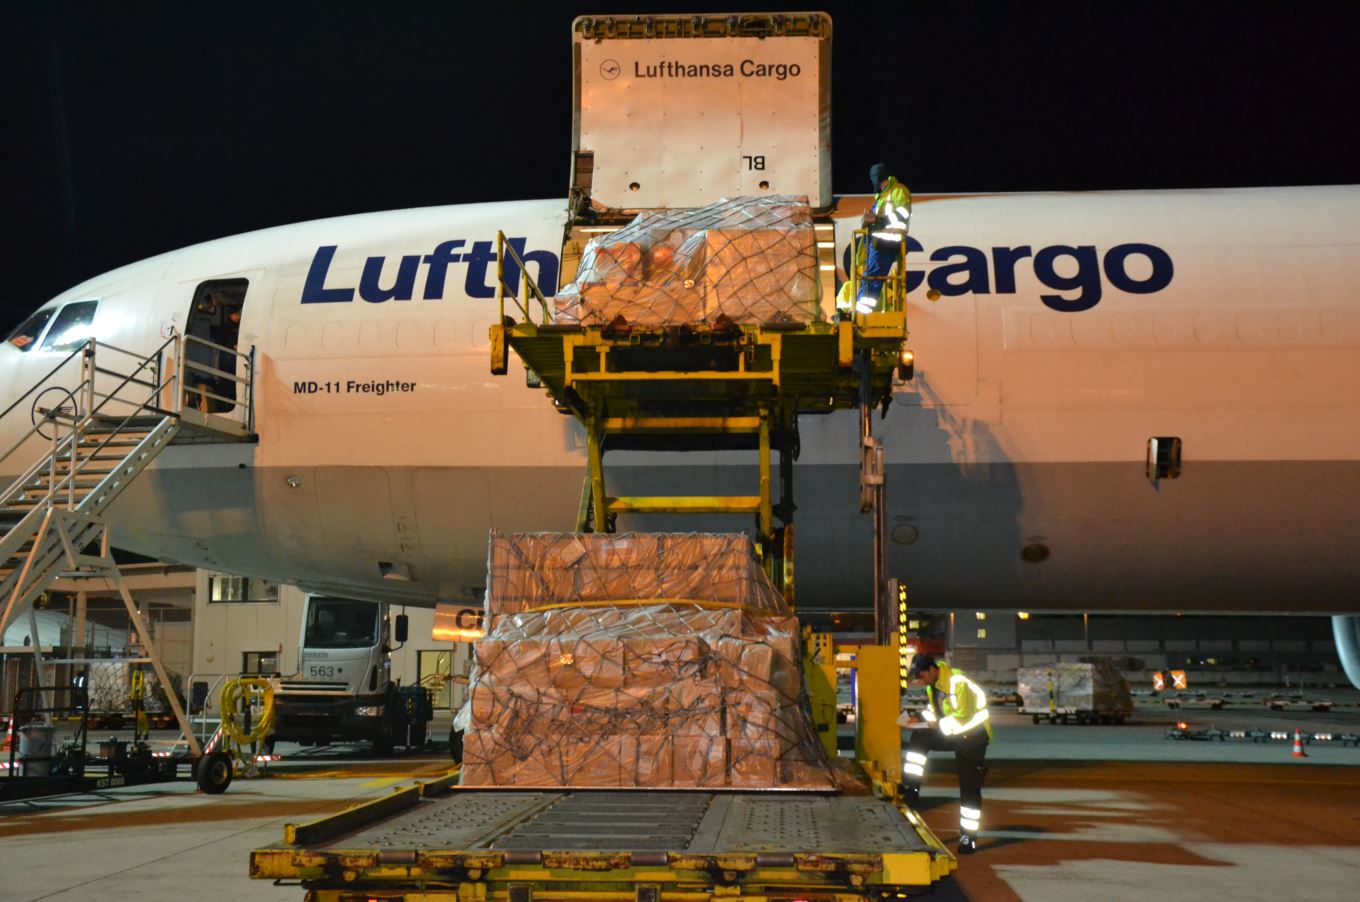 Lufthansa Cargo uses new sun protection for refrigerated freight